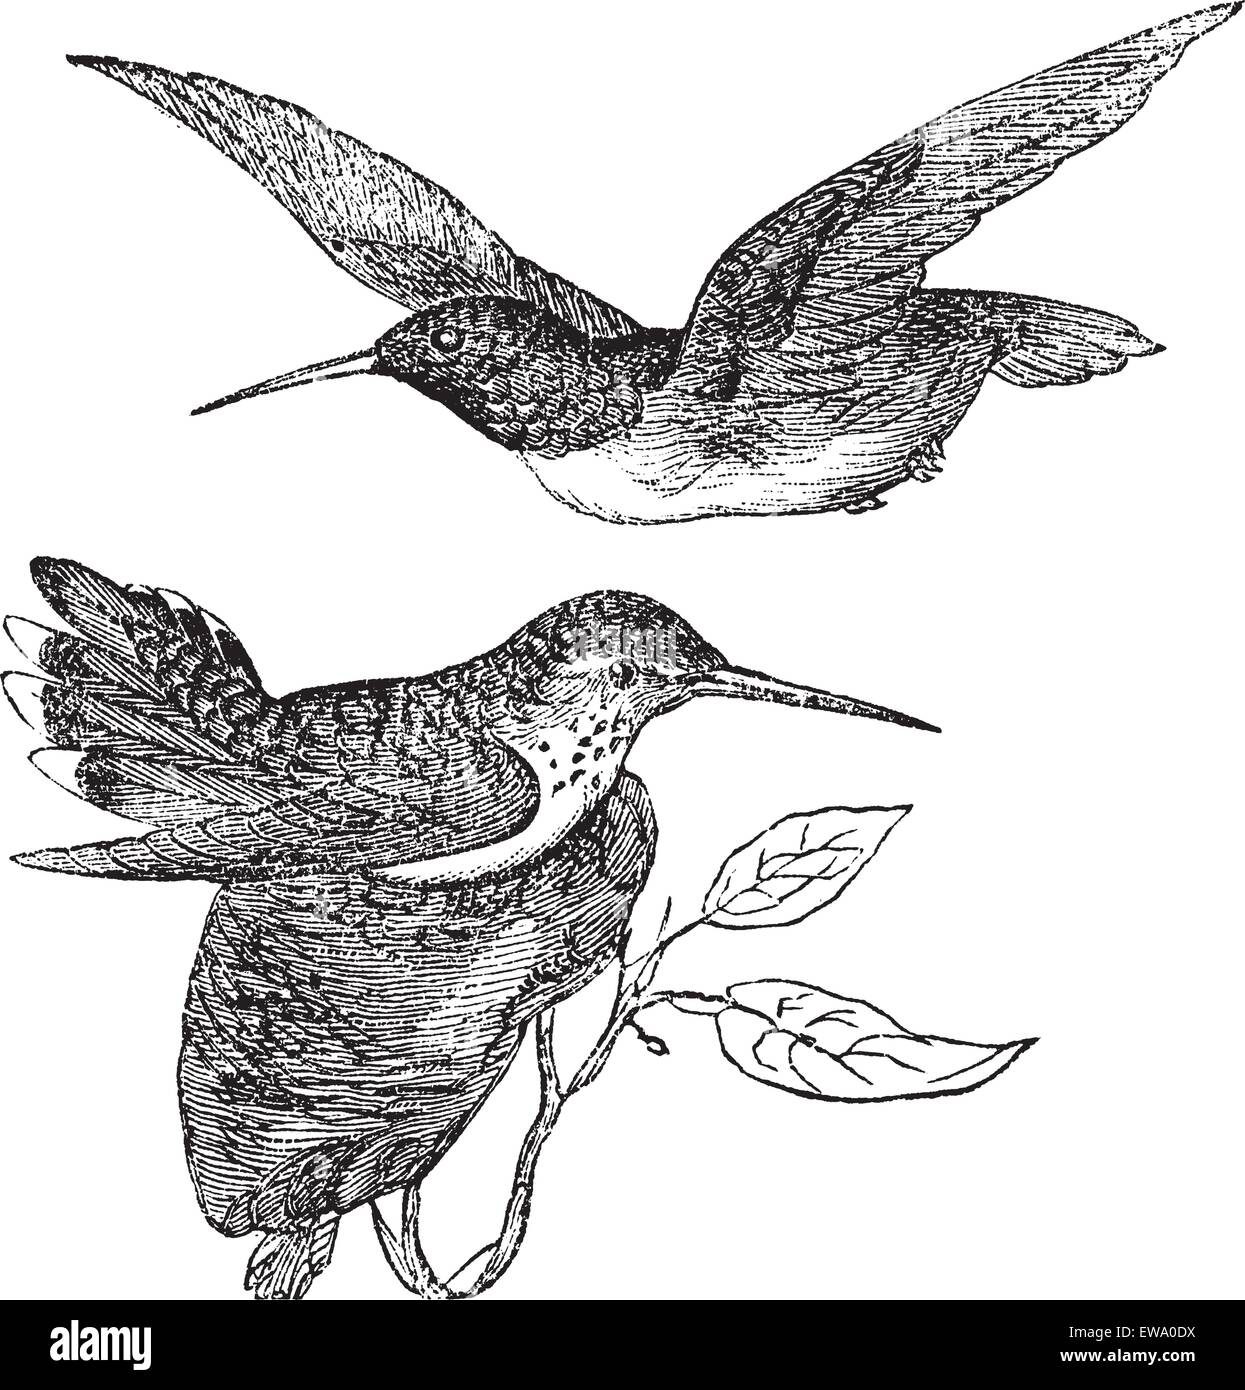 Anna's Hummingbird or Calypte anna, vintage engraving. Old engraved illustration of Anna's Hummingbird showing male bird (top) and female bird (bottom). Stock Vector